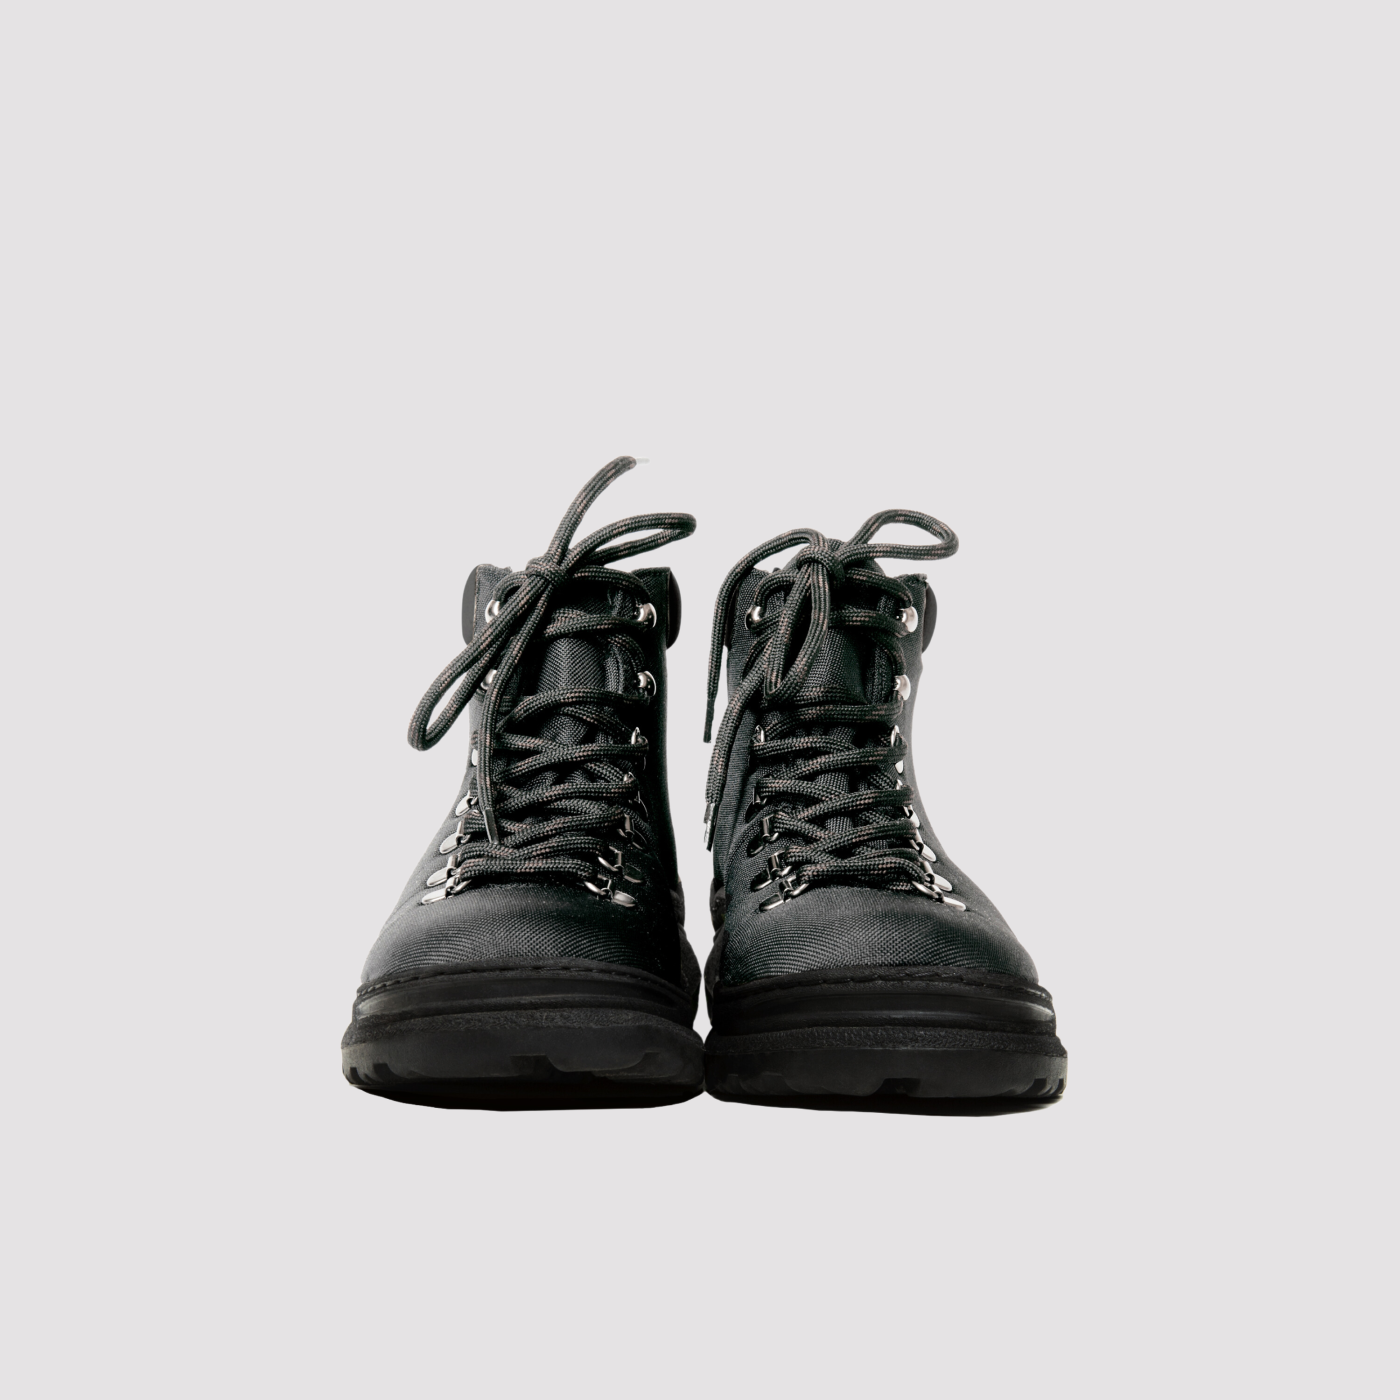 The Weekend Boot Classic Black